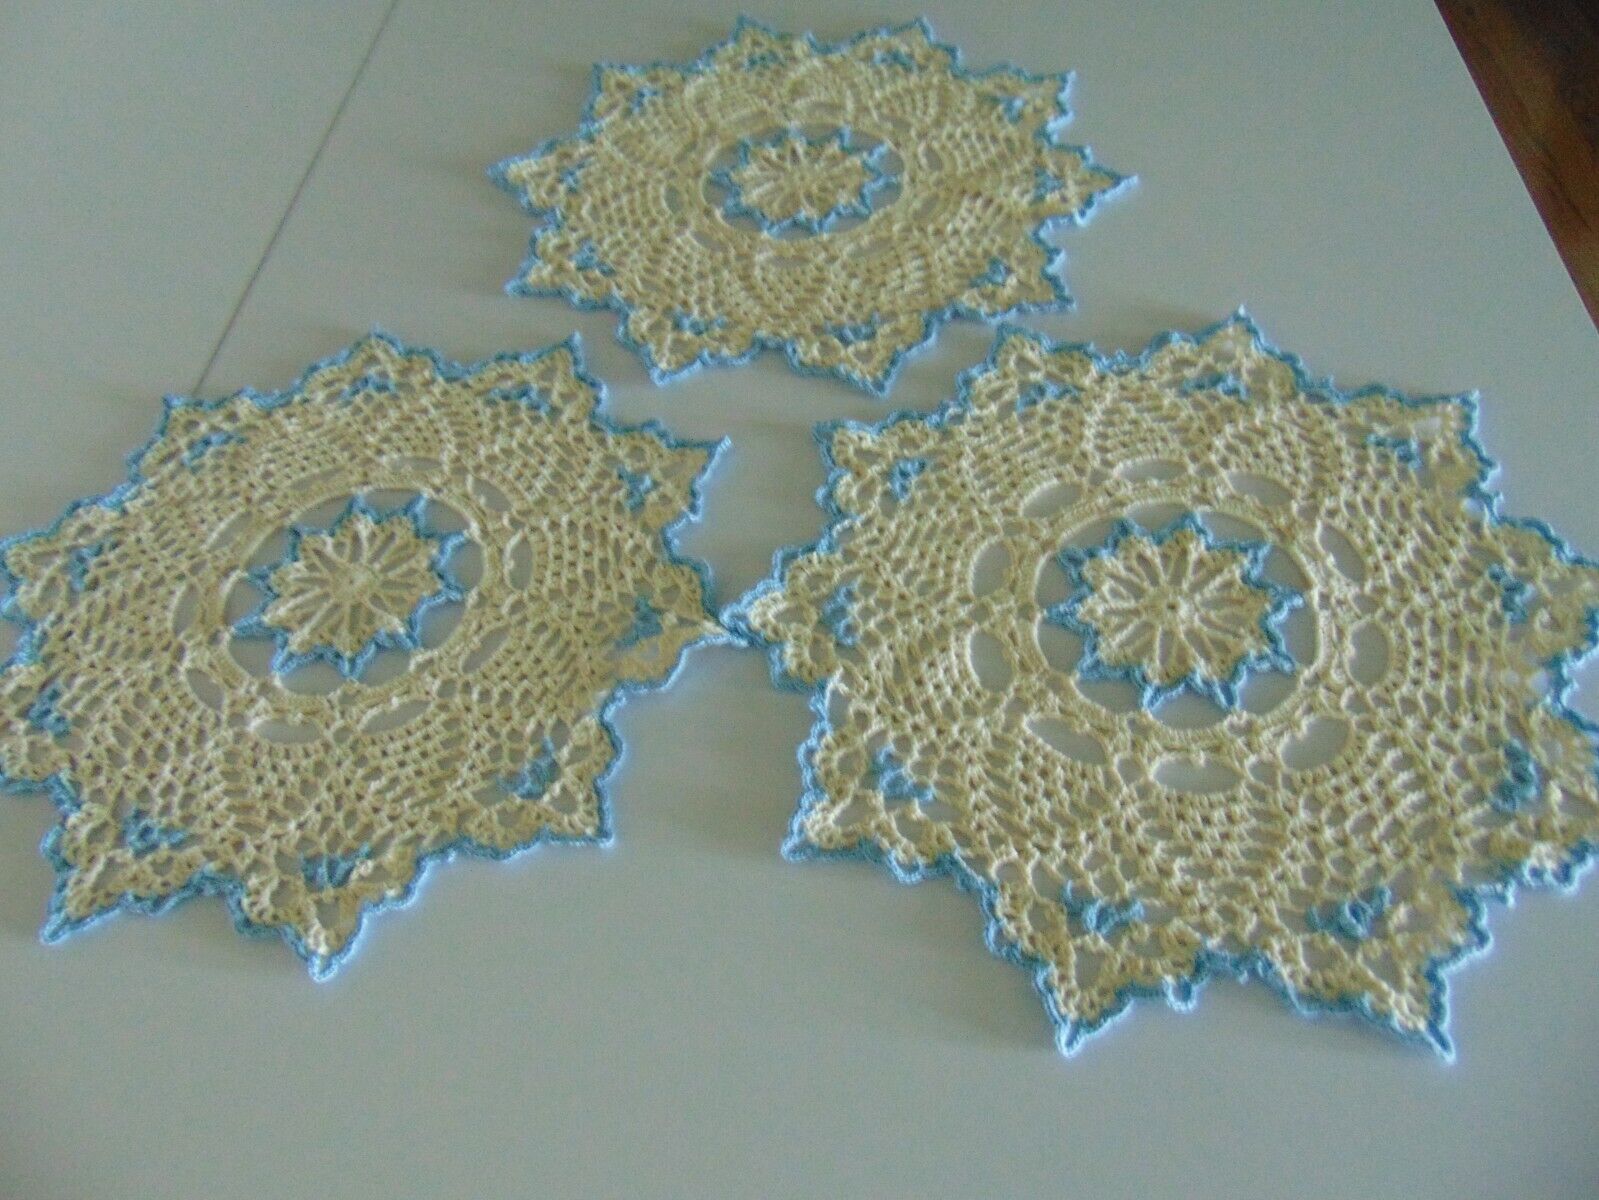 Lot of 3 BRAND NEW Handmade Pineapple Crochet Doilies-blue and natural colors